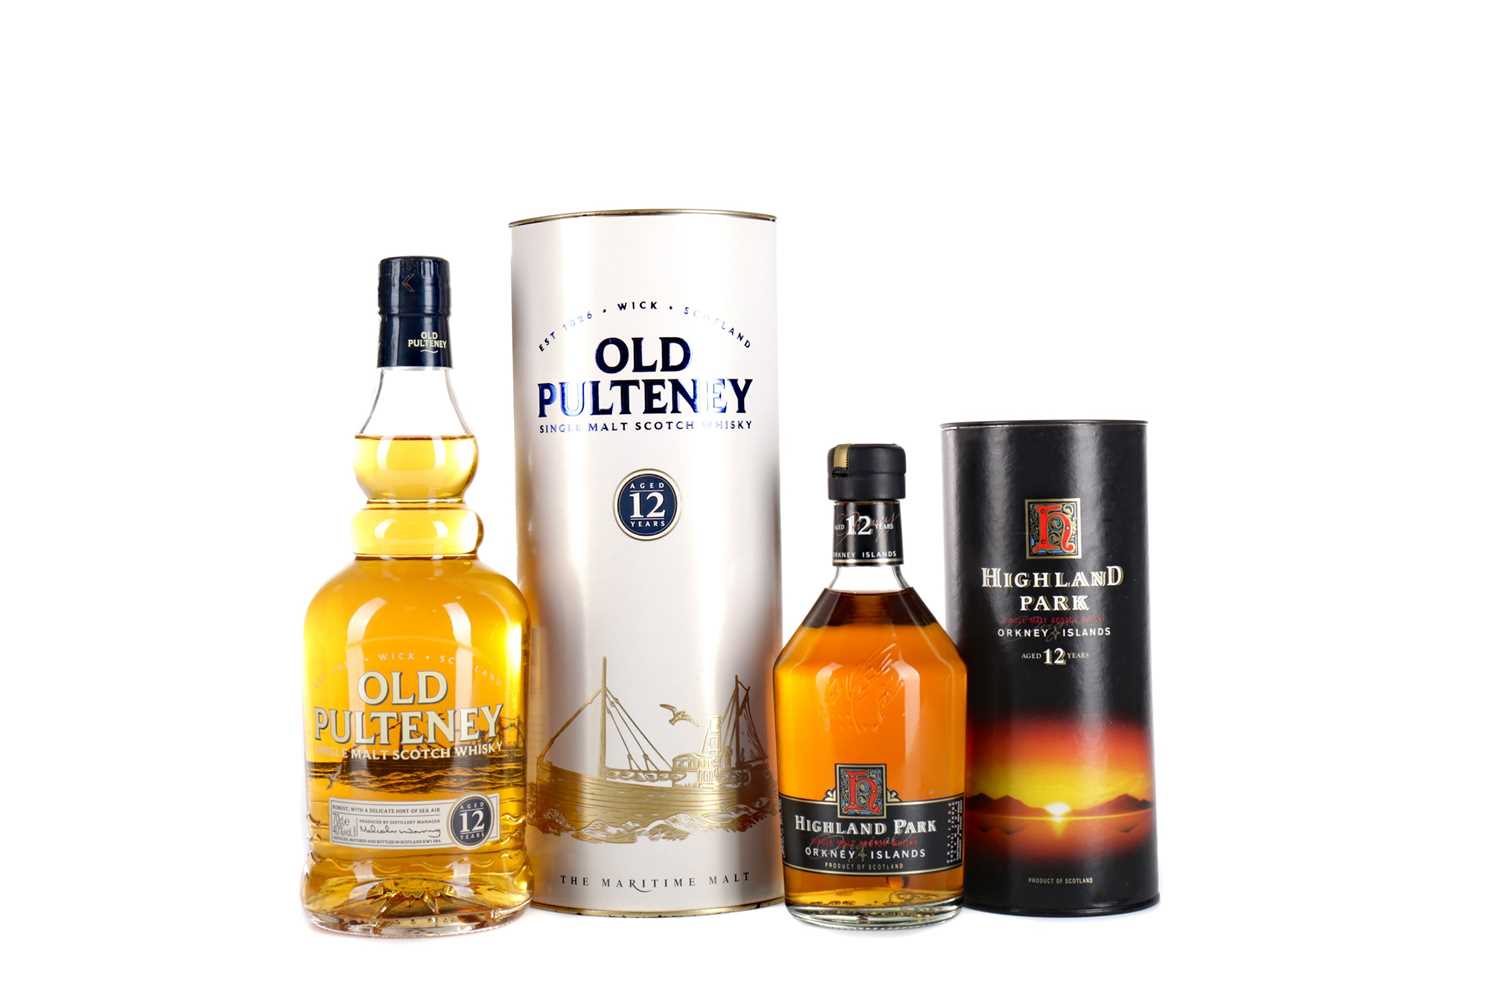 Lot 29 - ONE BOTTLES OF OLD PULTENEY AGED 12 YEARS AND A HALF BOTTLE OF HIGHLAND PARK AGED 12 YEARS